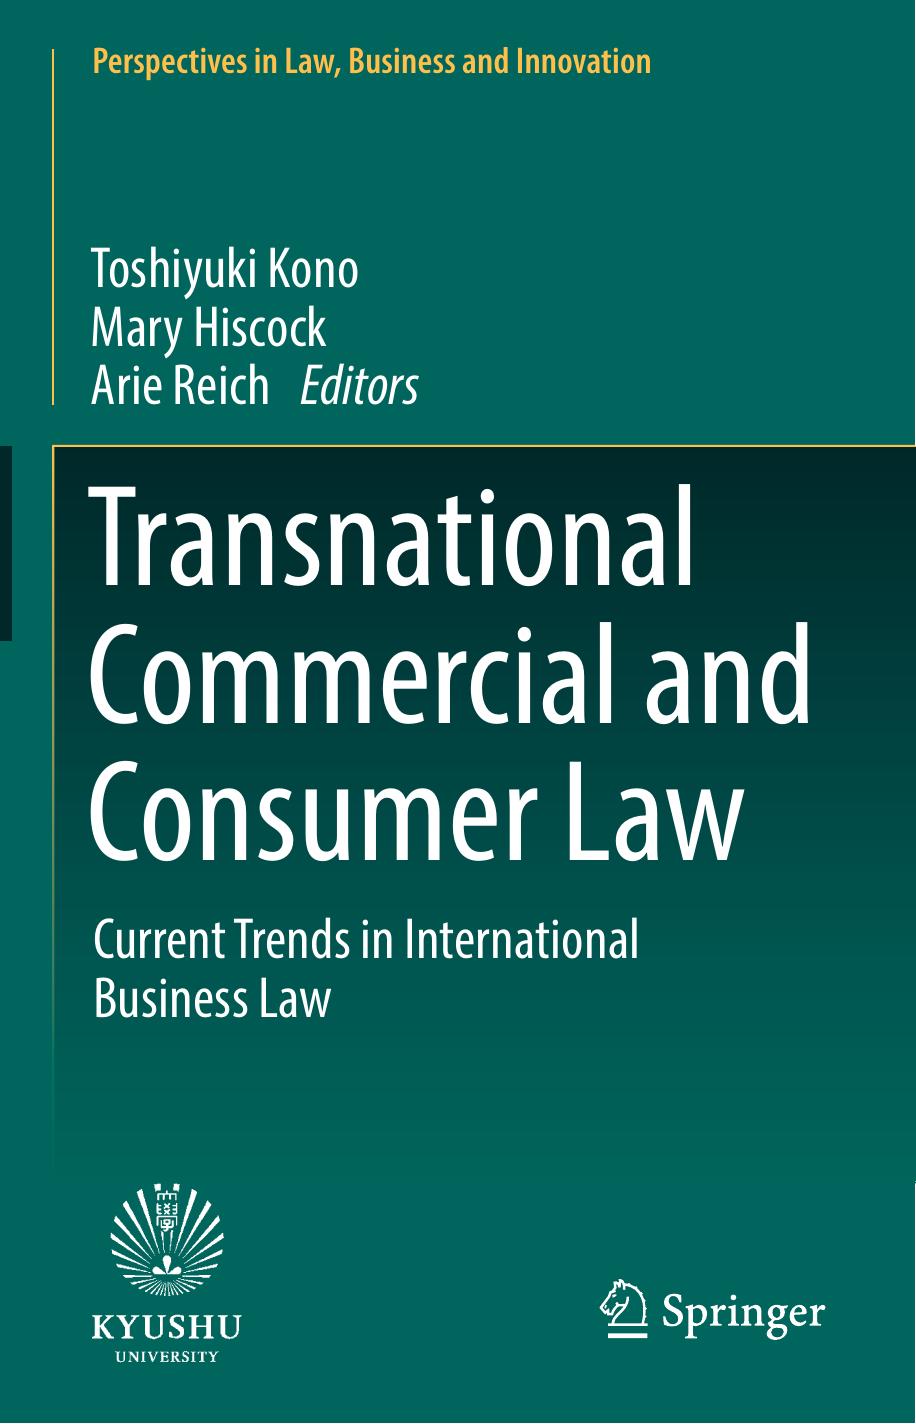 Transnational Commercial and Consumer Law Current Trends in International Business Law 2018